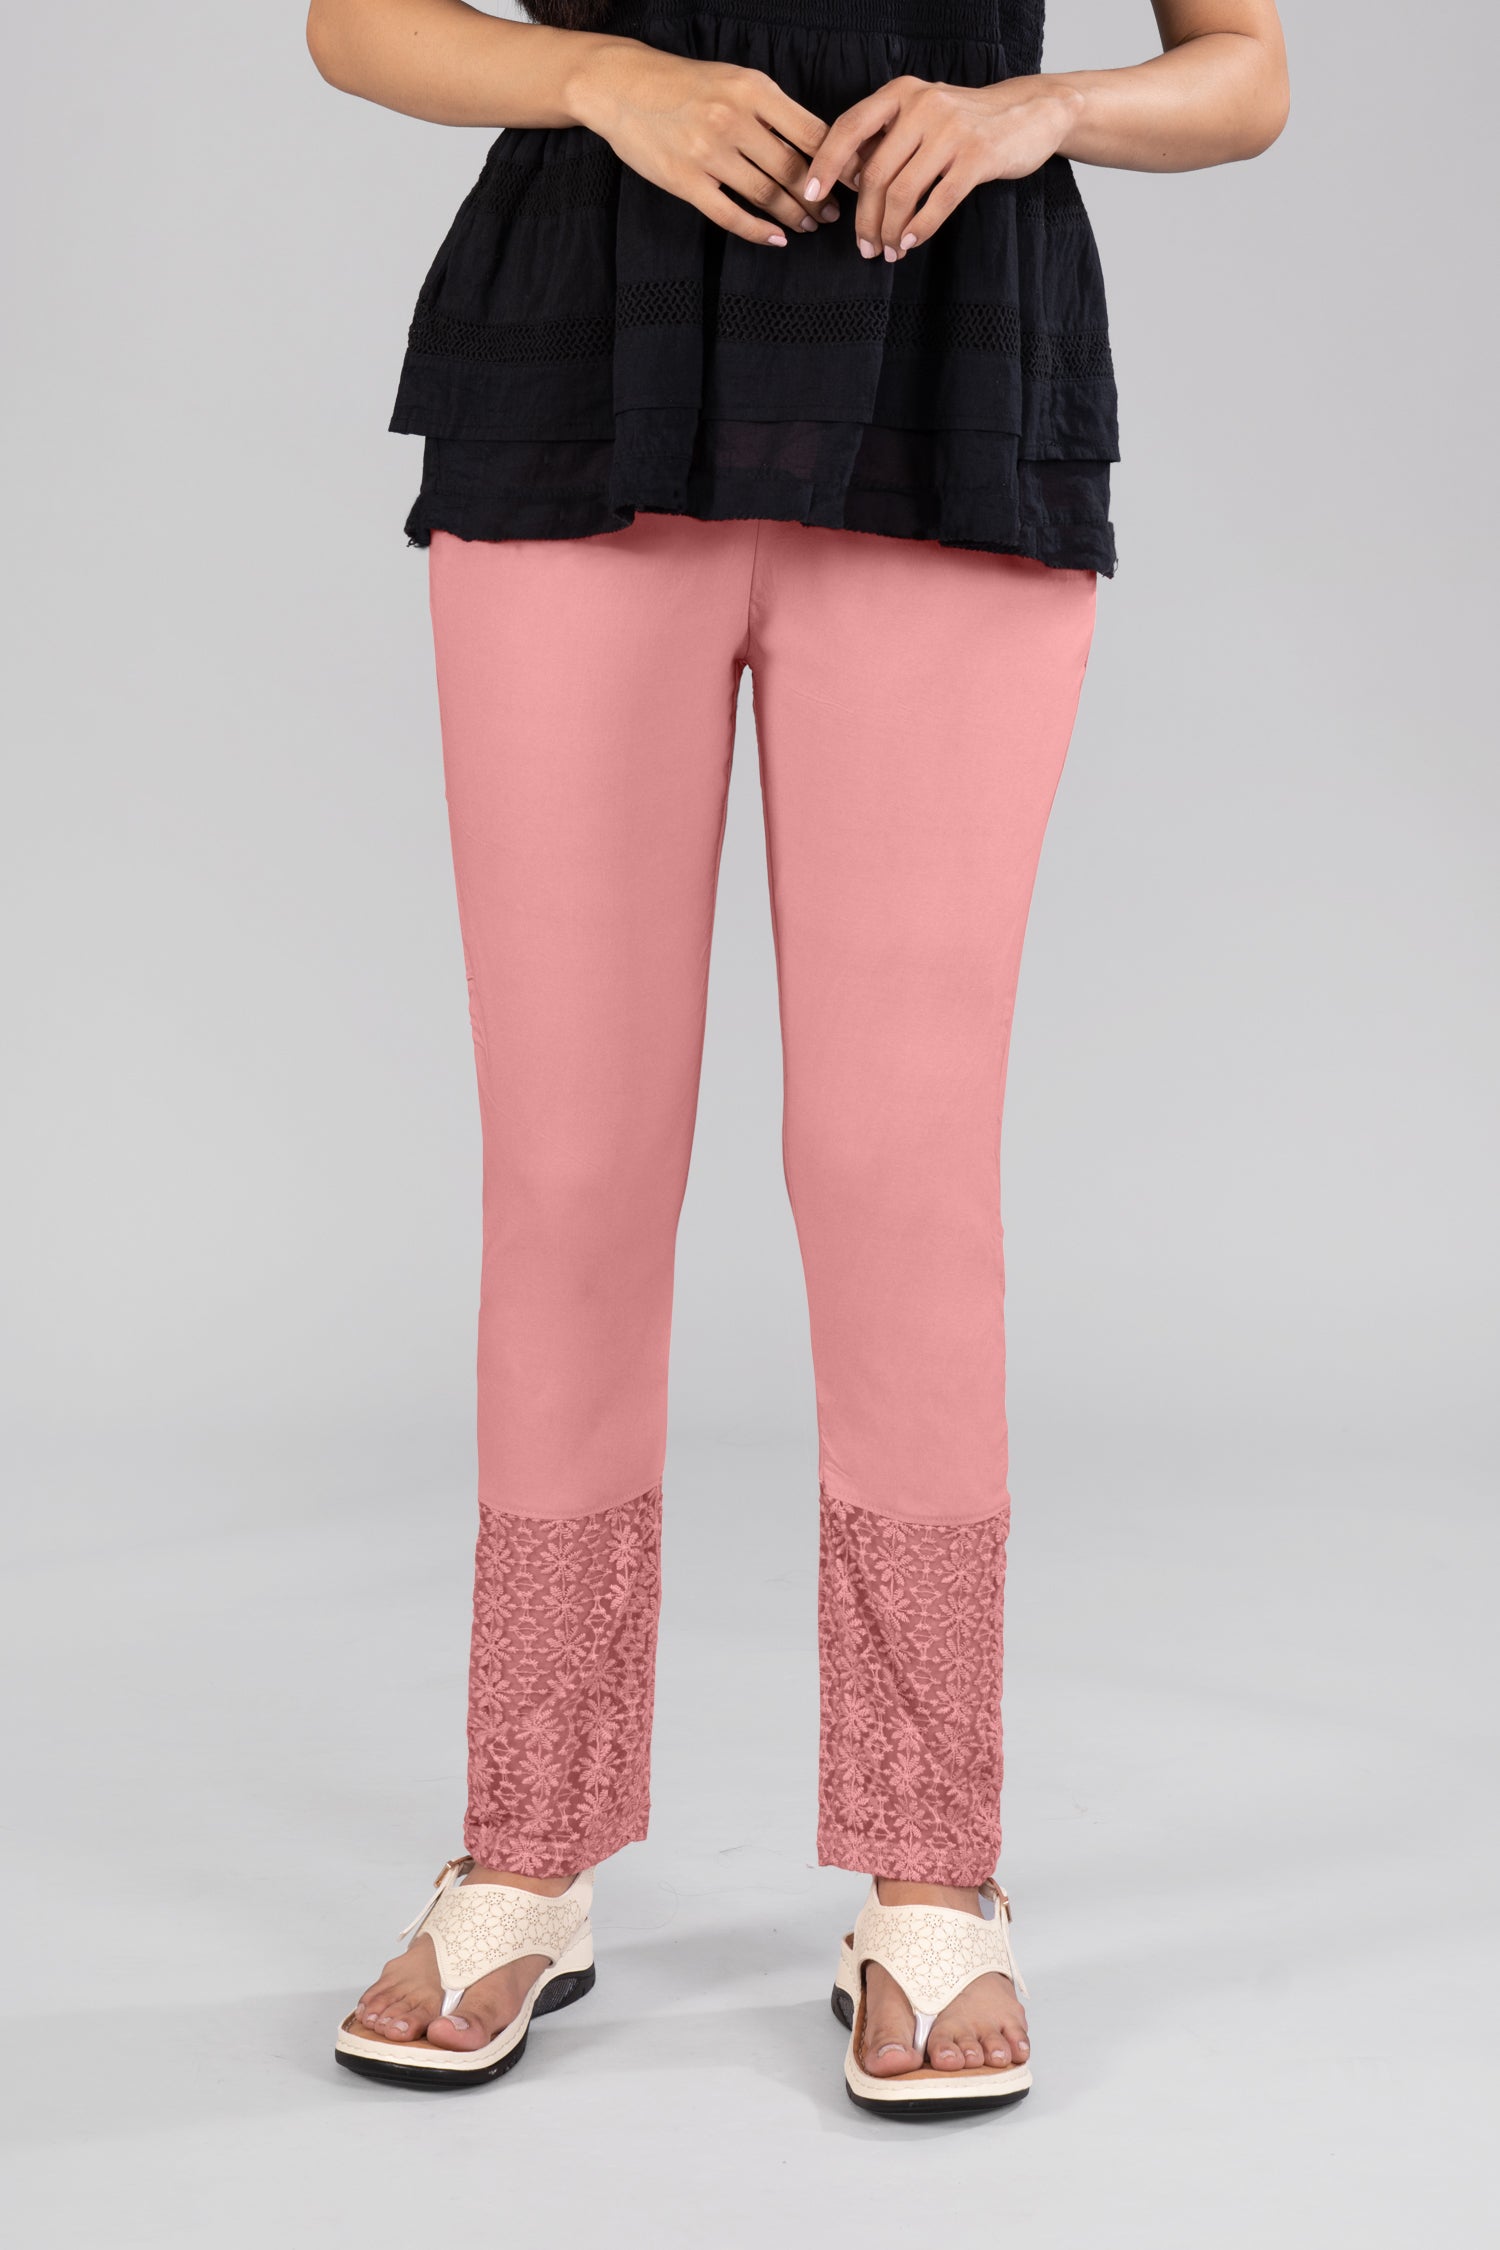 Givenchy Lace Monogram Stretch Legging in Light Pink | FWRD